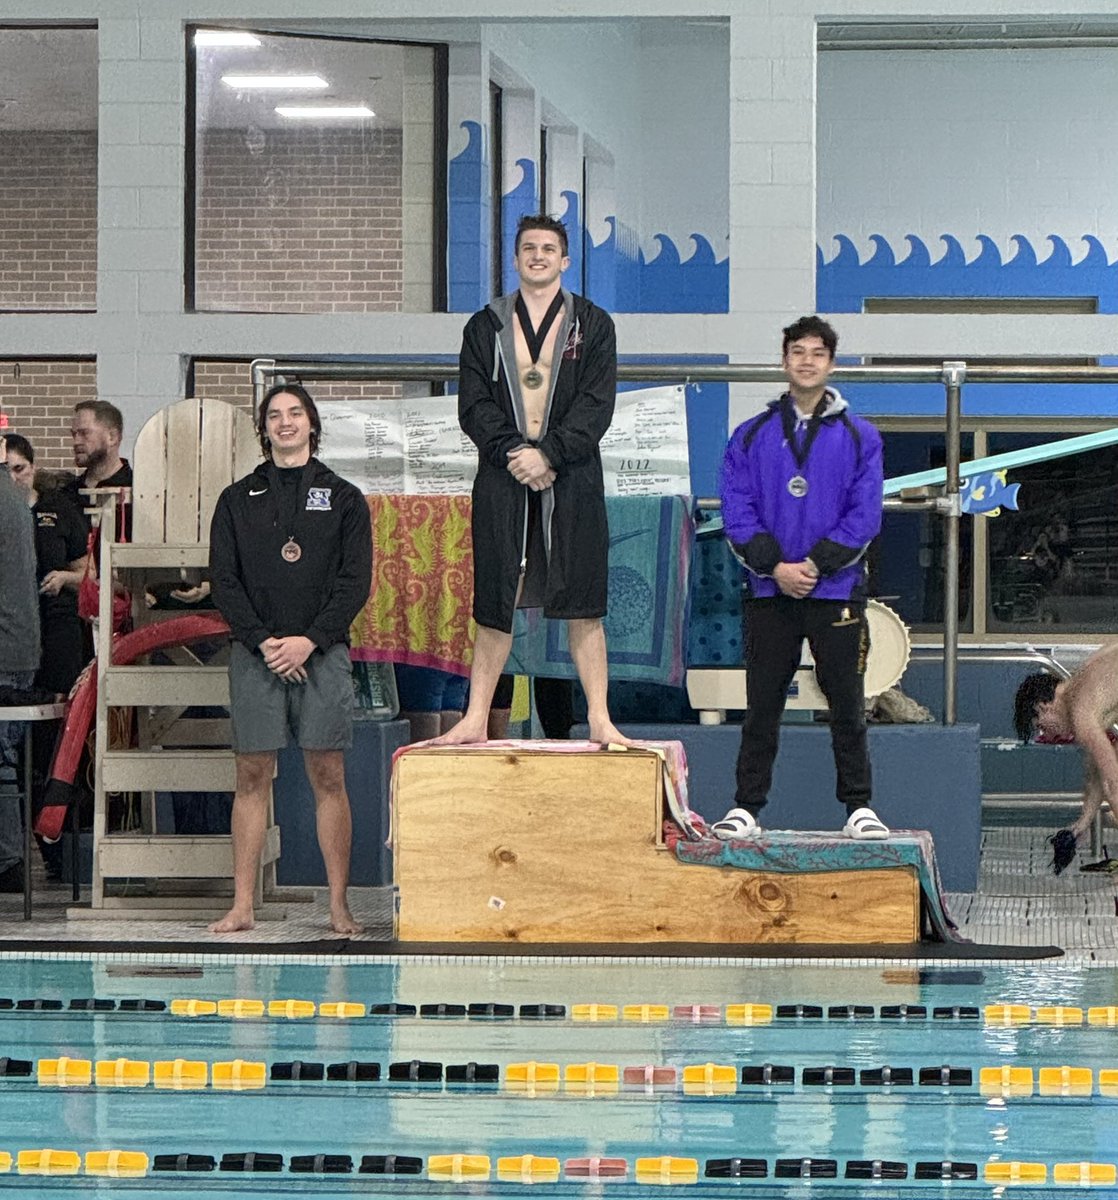 Cory Pham placed 1st in the 100 backstroke 🥇 and 3rd in the 100 butterfly 🥉 Congrats Cory!